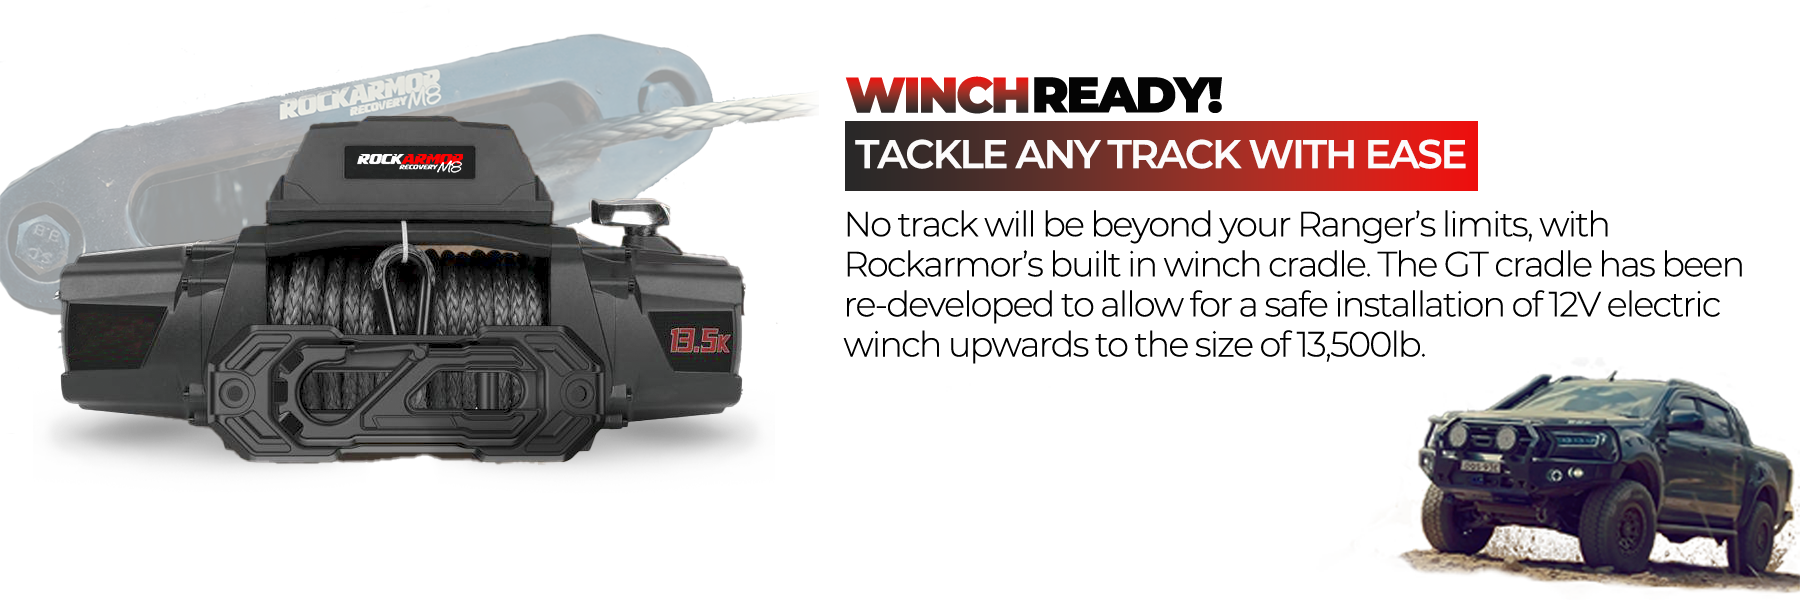 winch-ready-banner.png